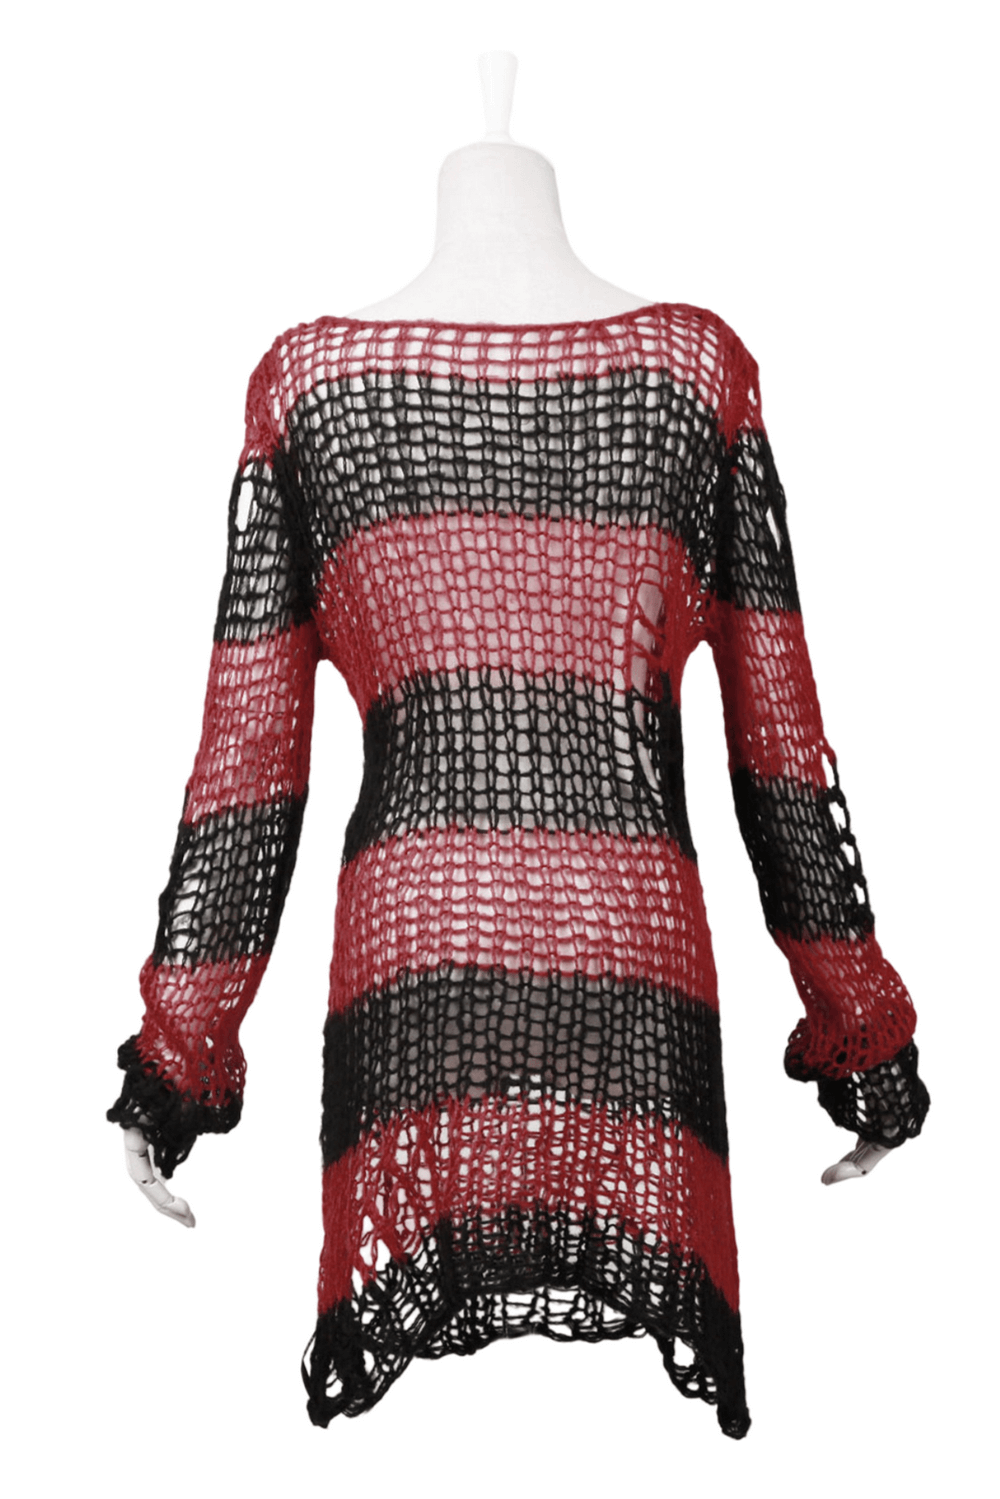 Long Sleeves Red and Black Striped Crocheted Sweater